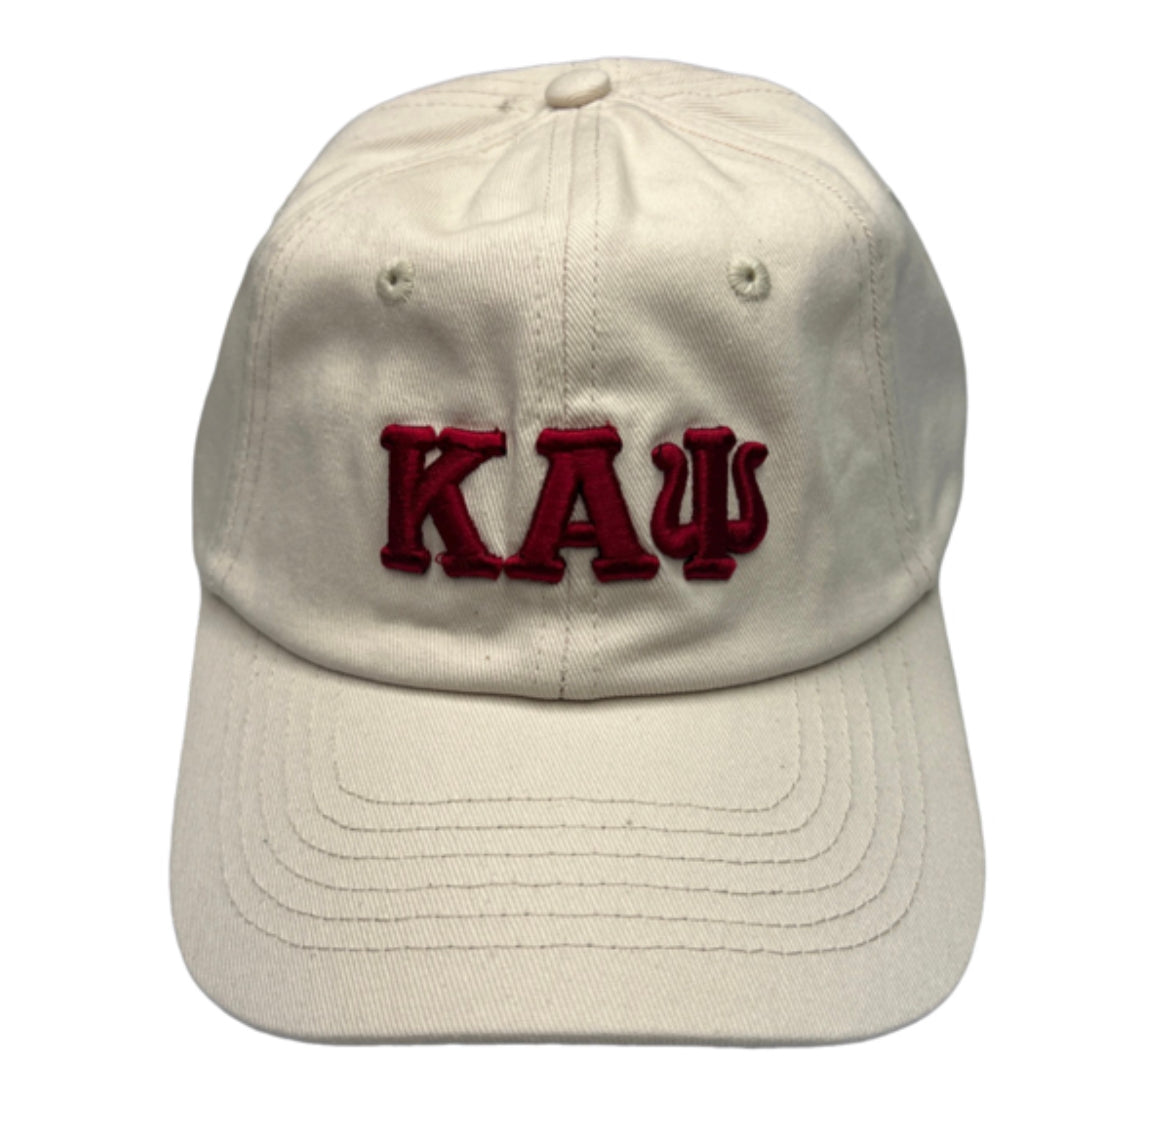 Show your pride for Kappa Alpha Psi with this cream baseball hat. Perfect for any occasion, this hat is a must-have for any Fraternity member. Represent your organization with style and class. The cream color adds a touch of sophistication while the Kappa Alpha Psi logo boldly stands out on the front of the hat. Wear it to social events, on campus, or out with friends. This hat is a great addition to any collection and makes a perfect gift for fellow members.